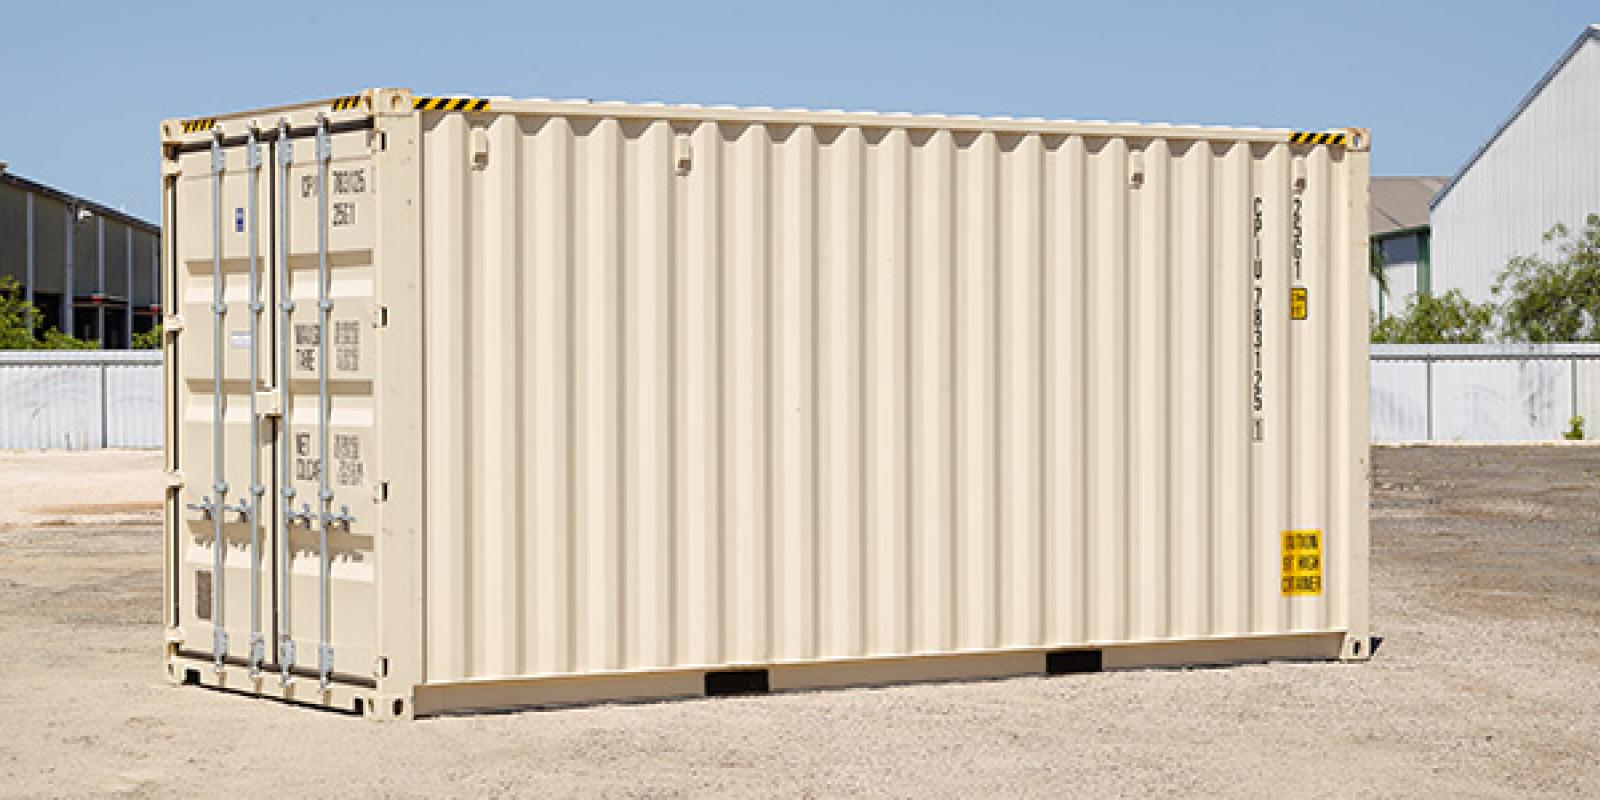 Shipping containers / storage in Victoria BC